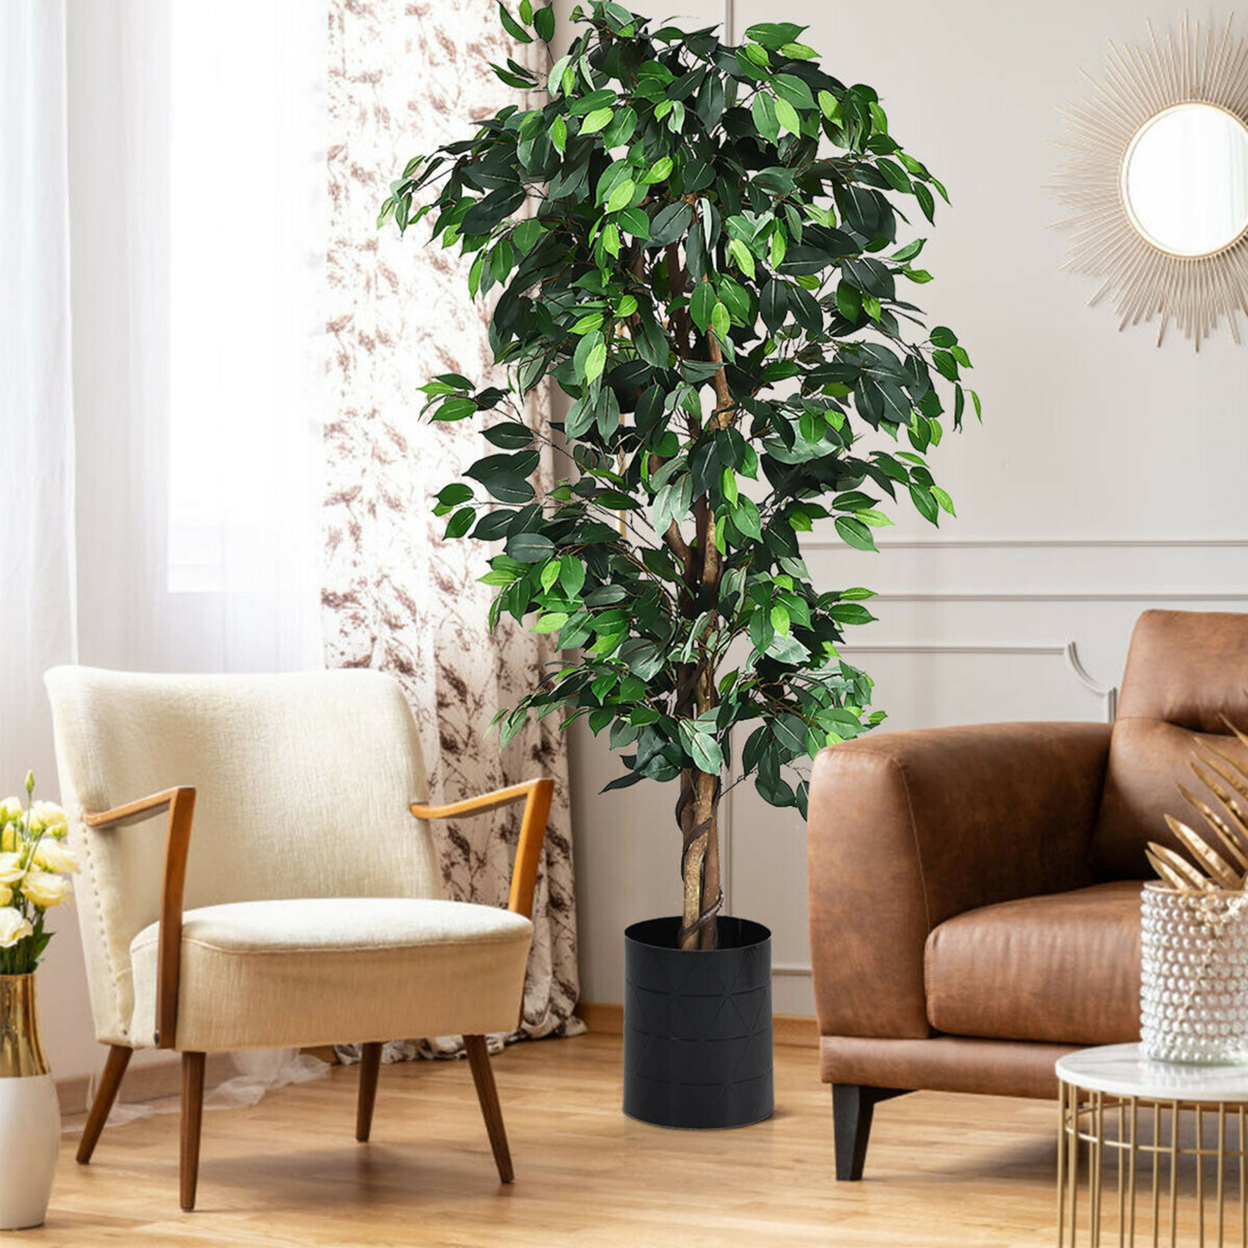 6Ft Artificial Ficus Tree Fake Greenery Plant Home Office Decoration